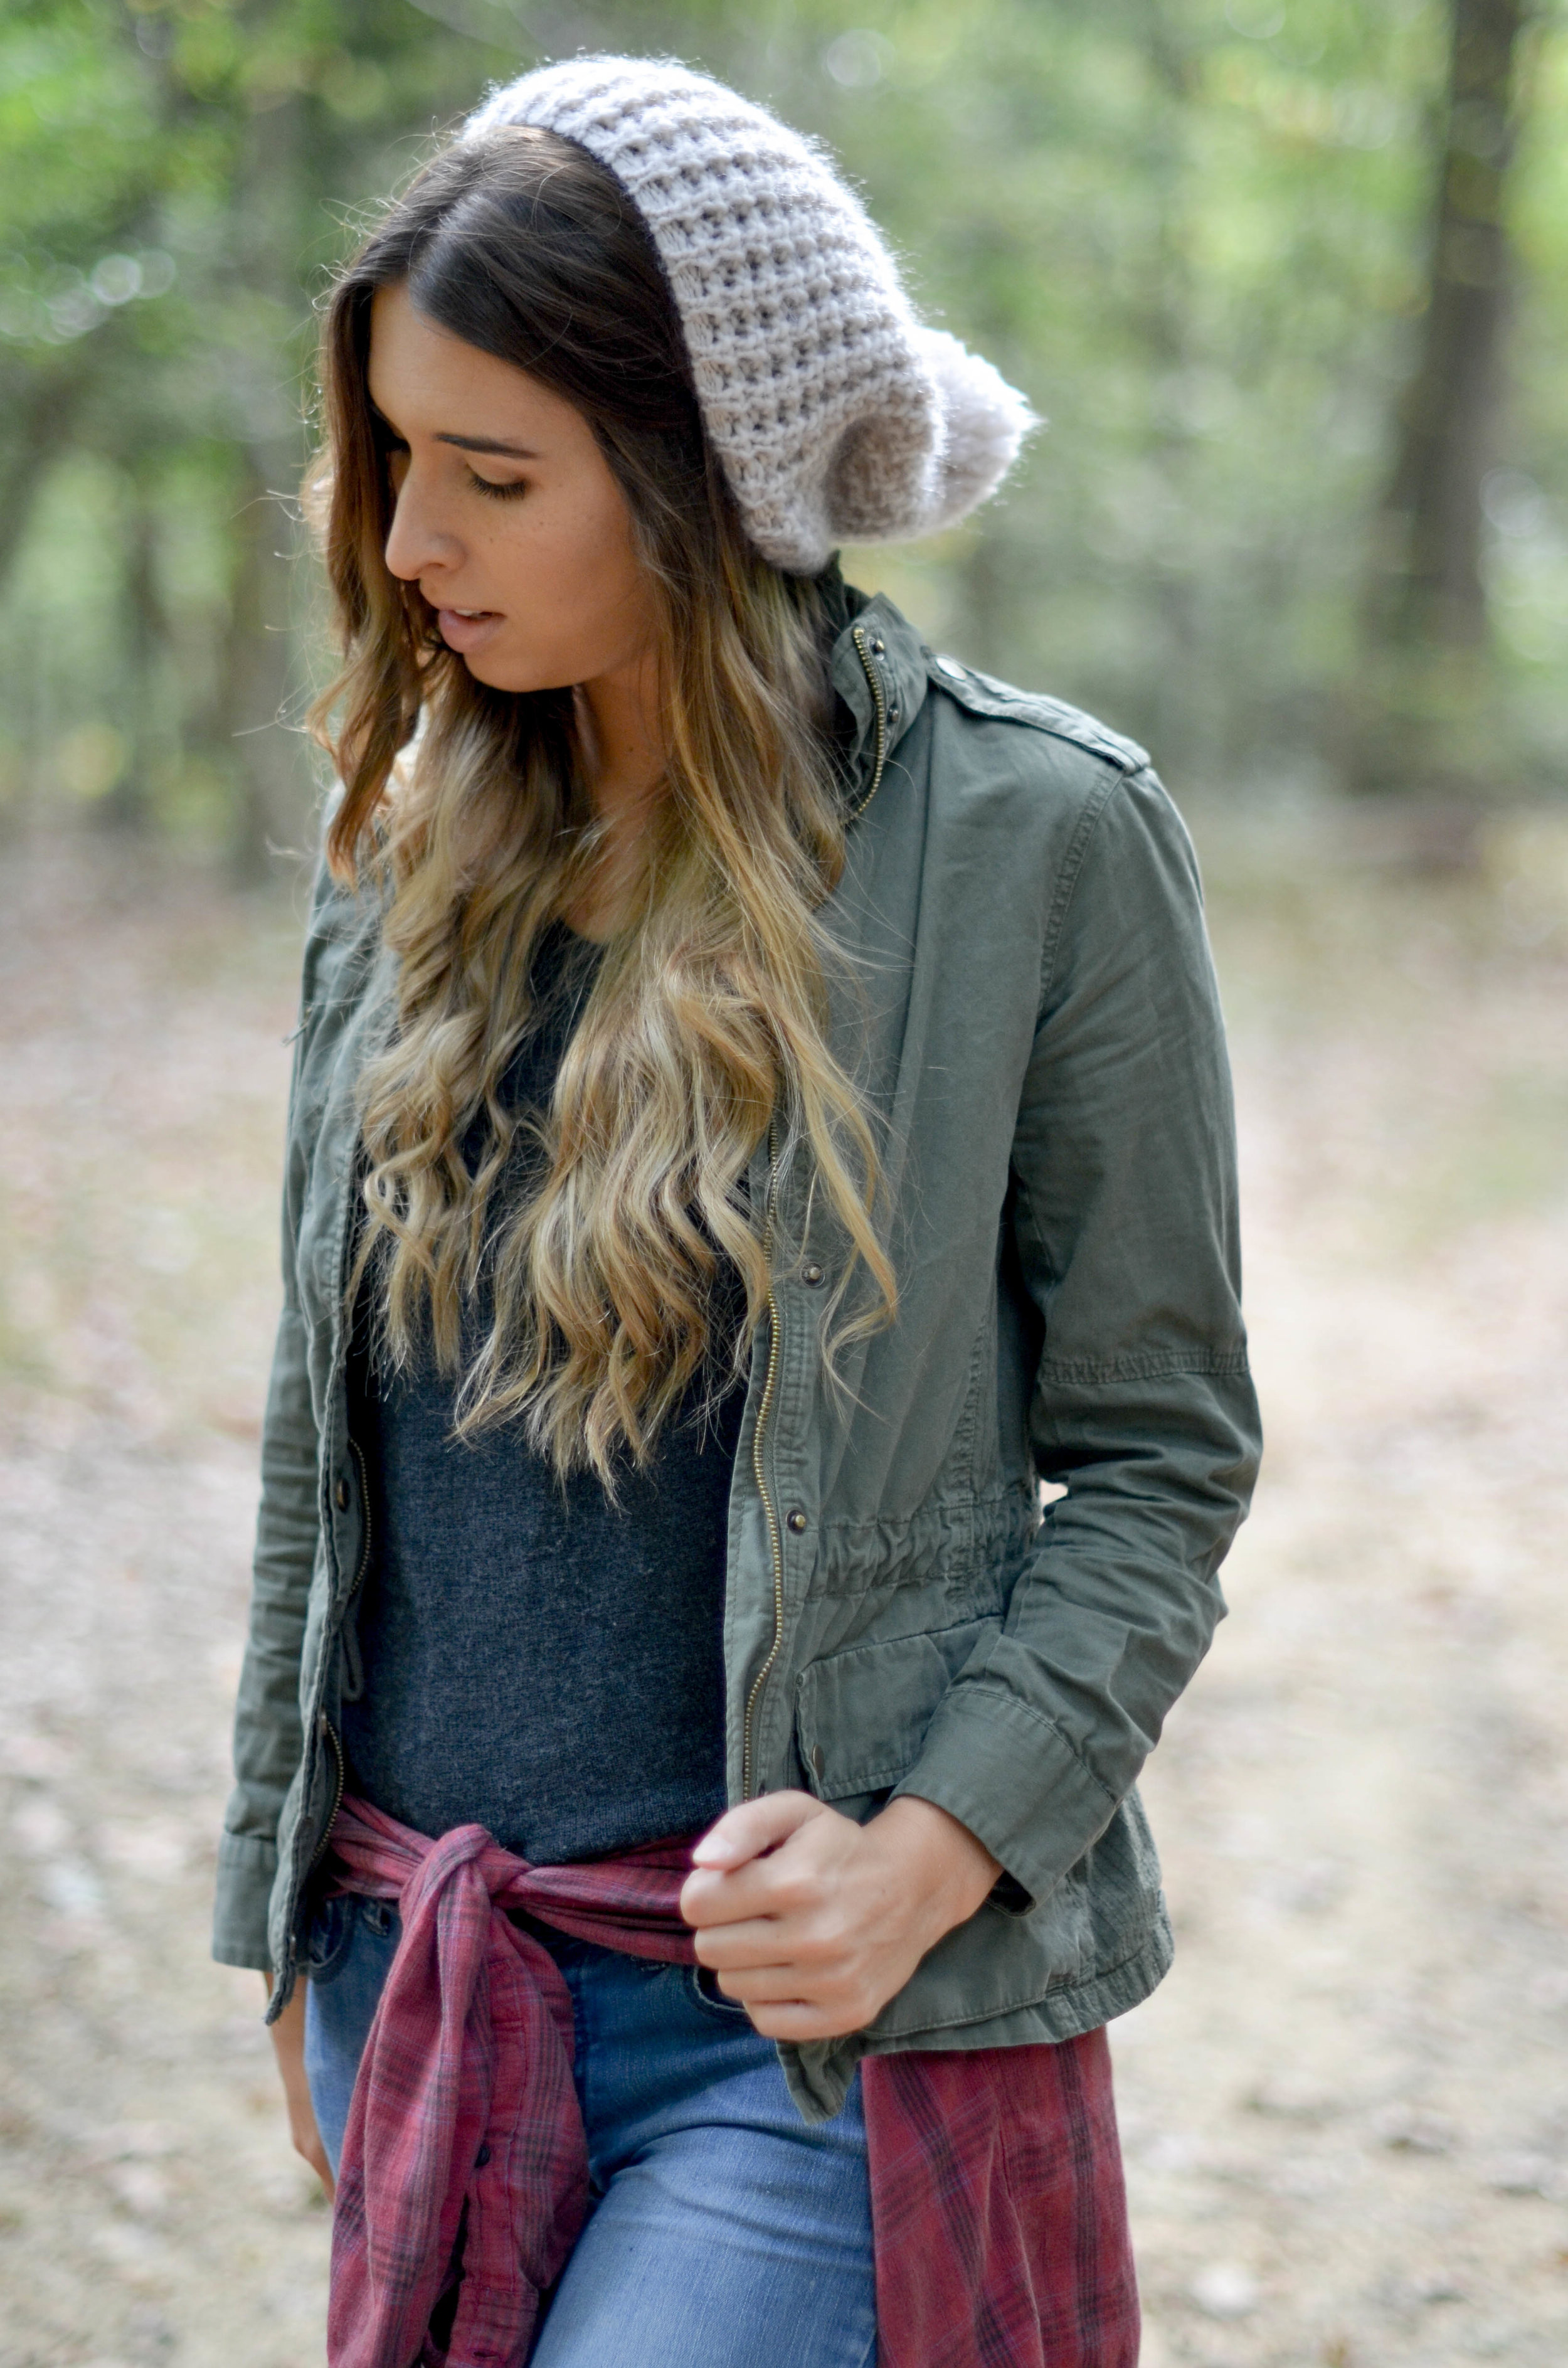 Easy Simple Everyday Fall Style with Slouchy Hat by Josie Michelle Davis